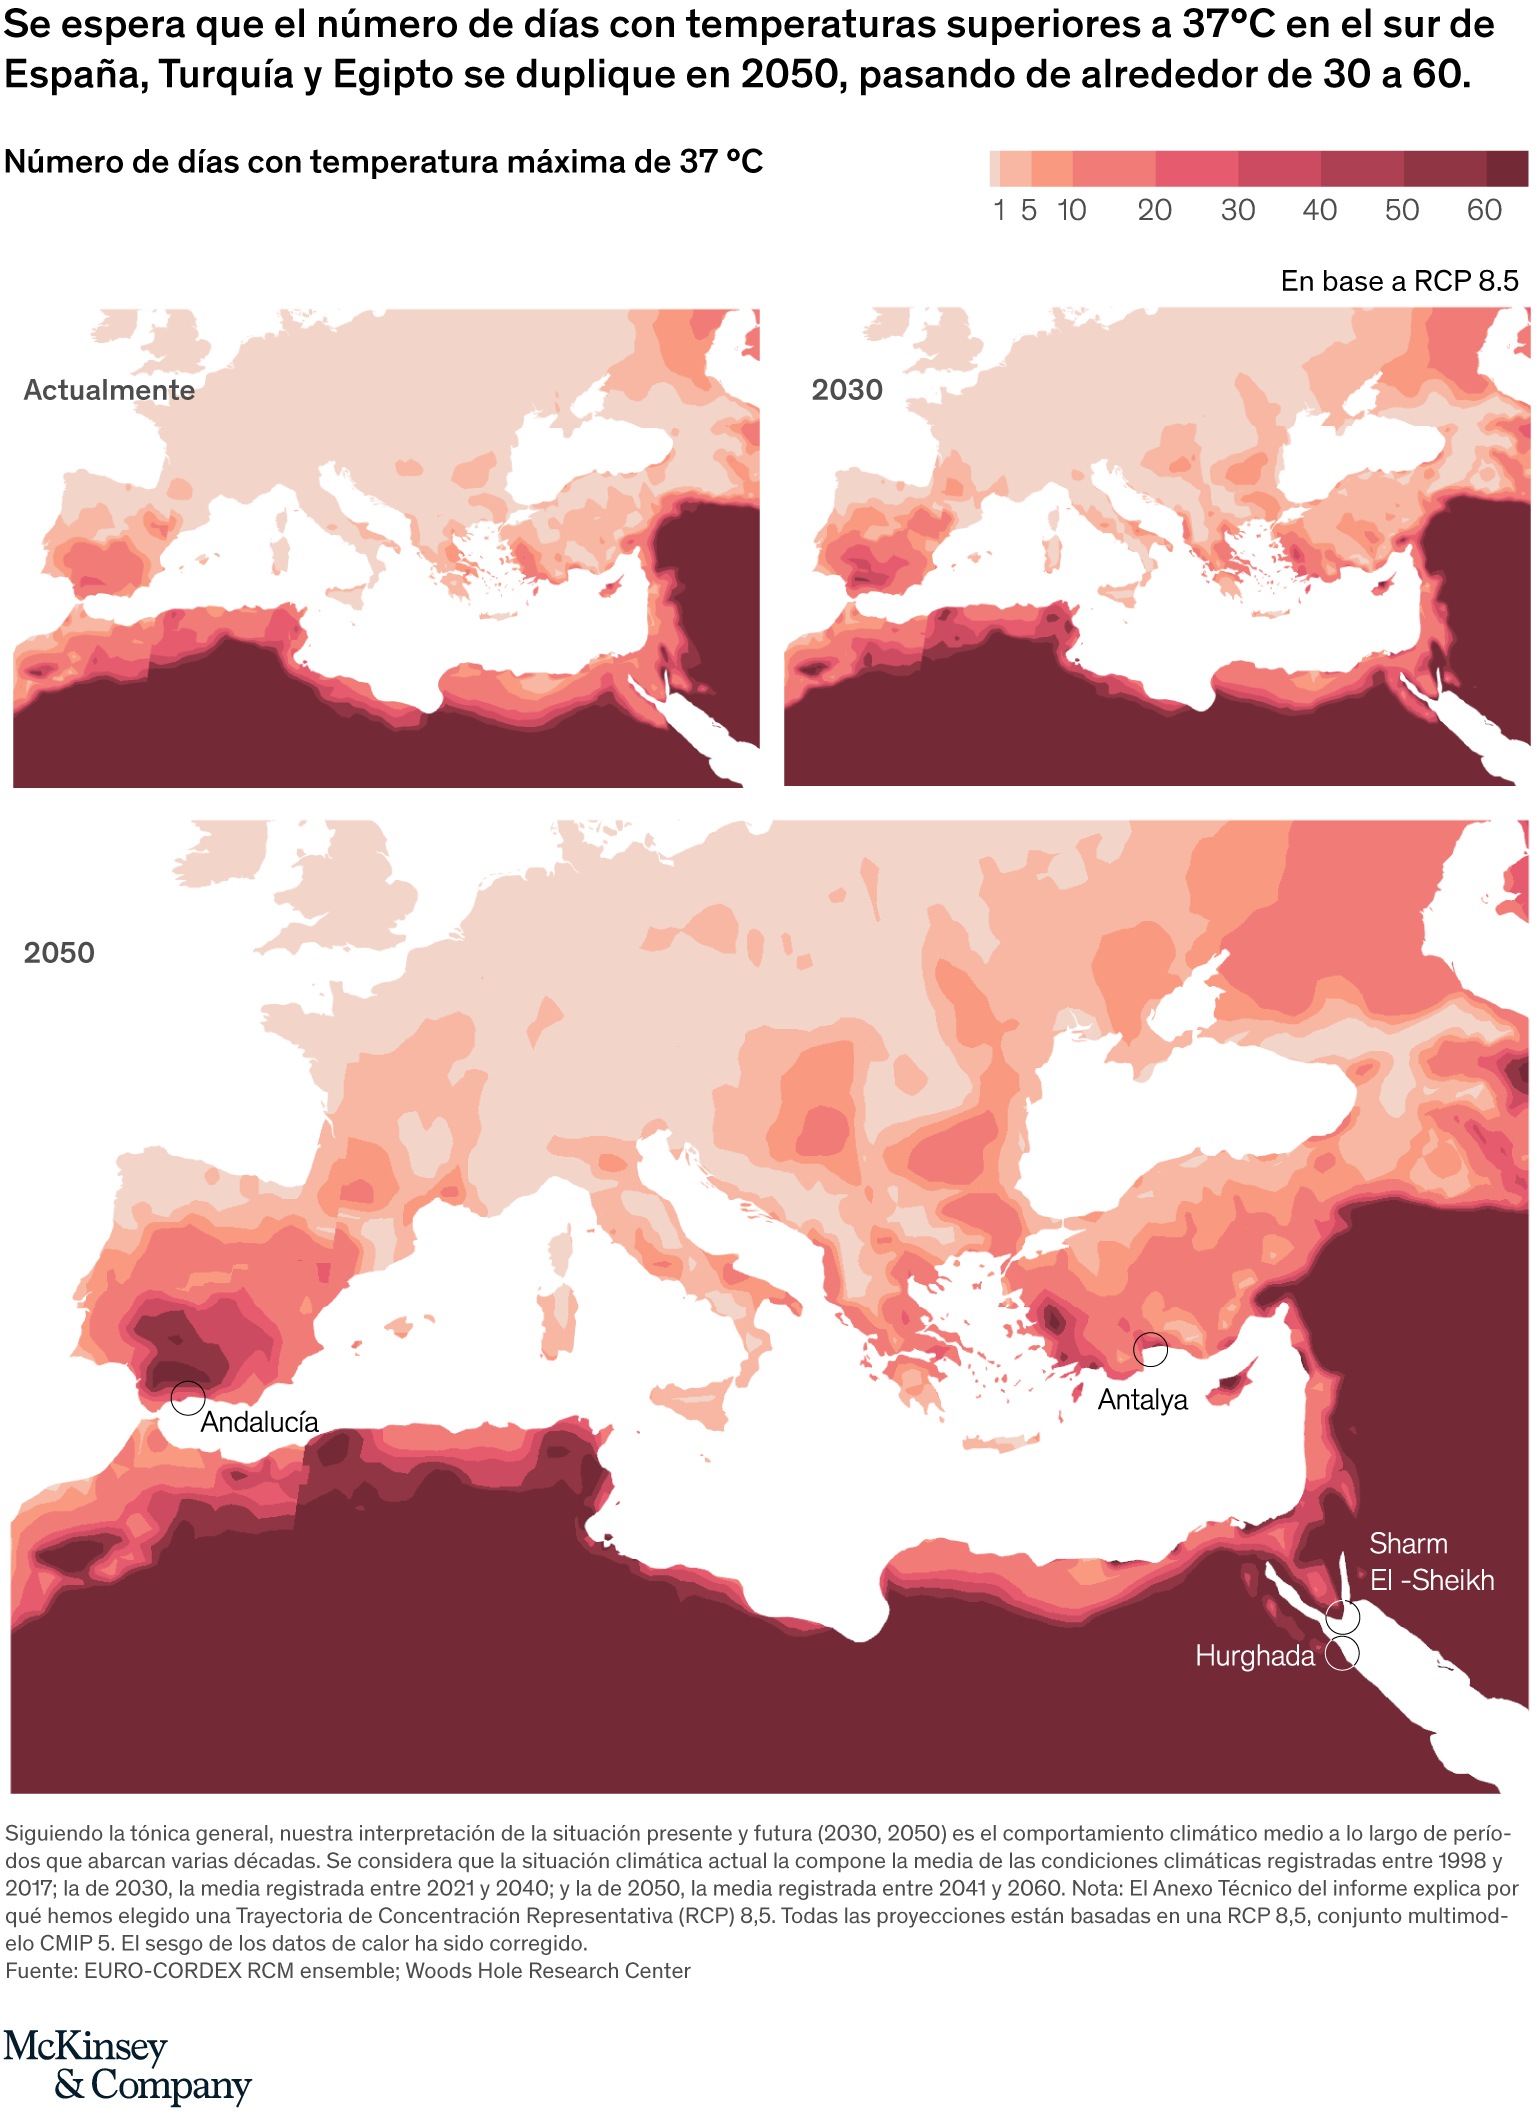 A Mediterranean basin without a Mediterranean climate?